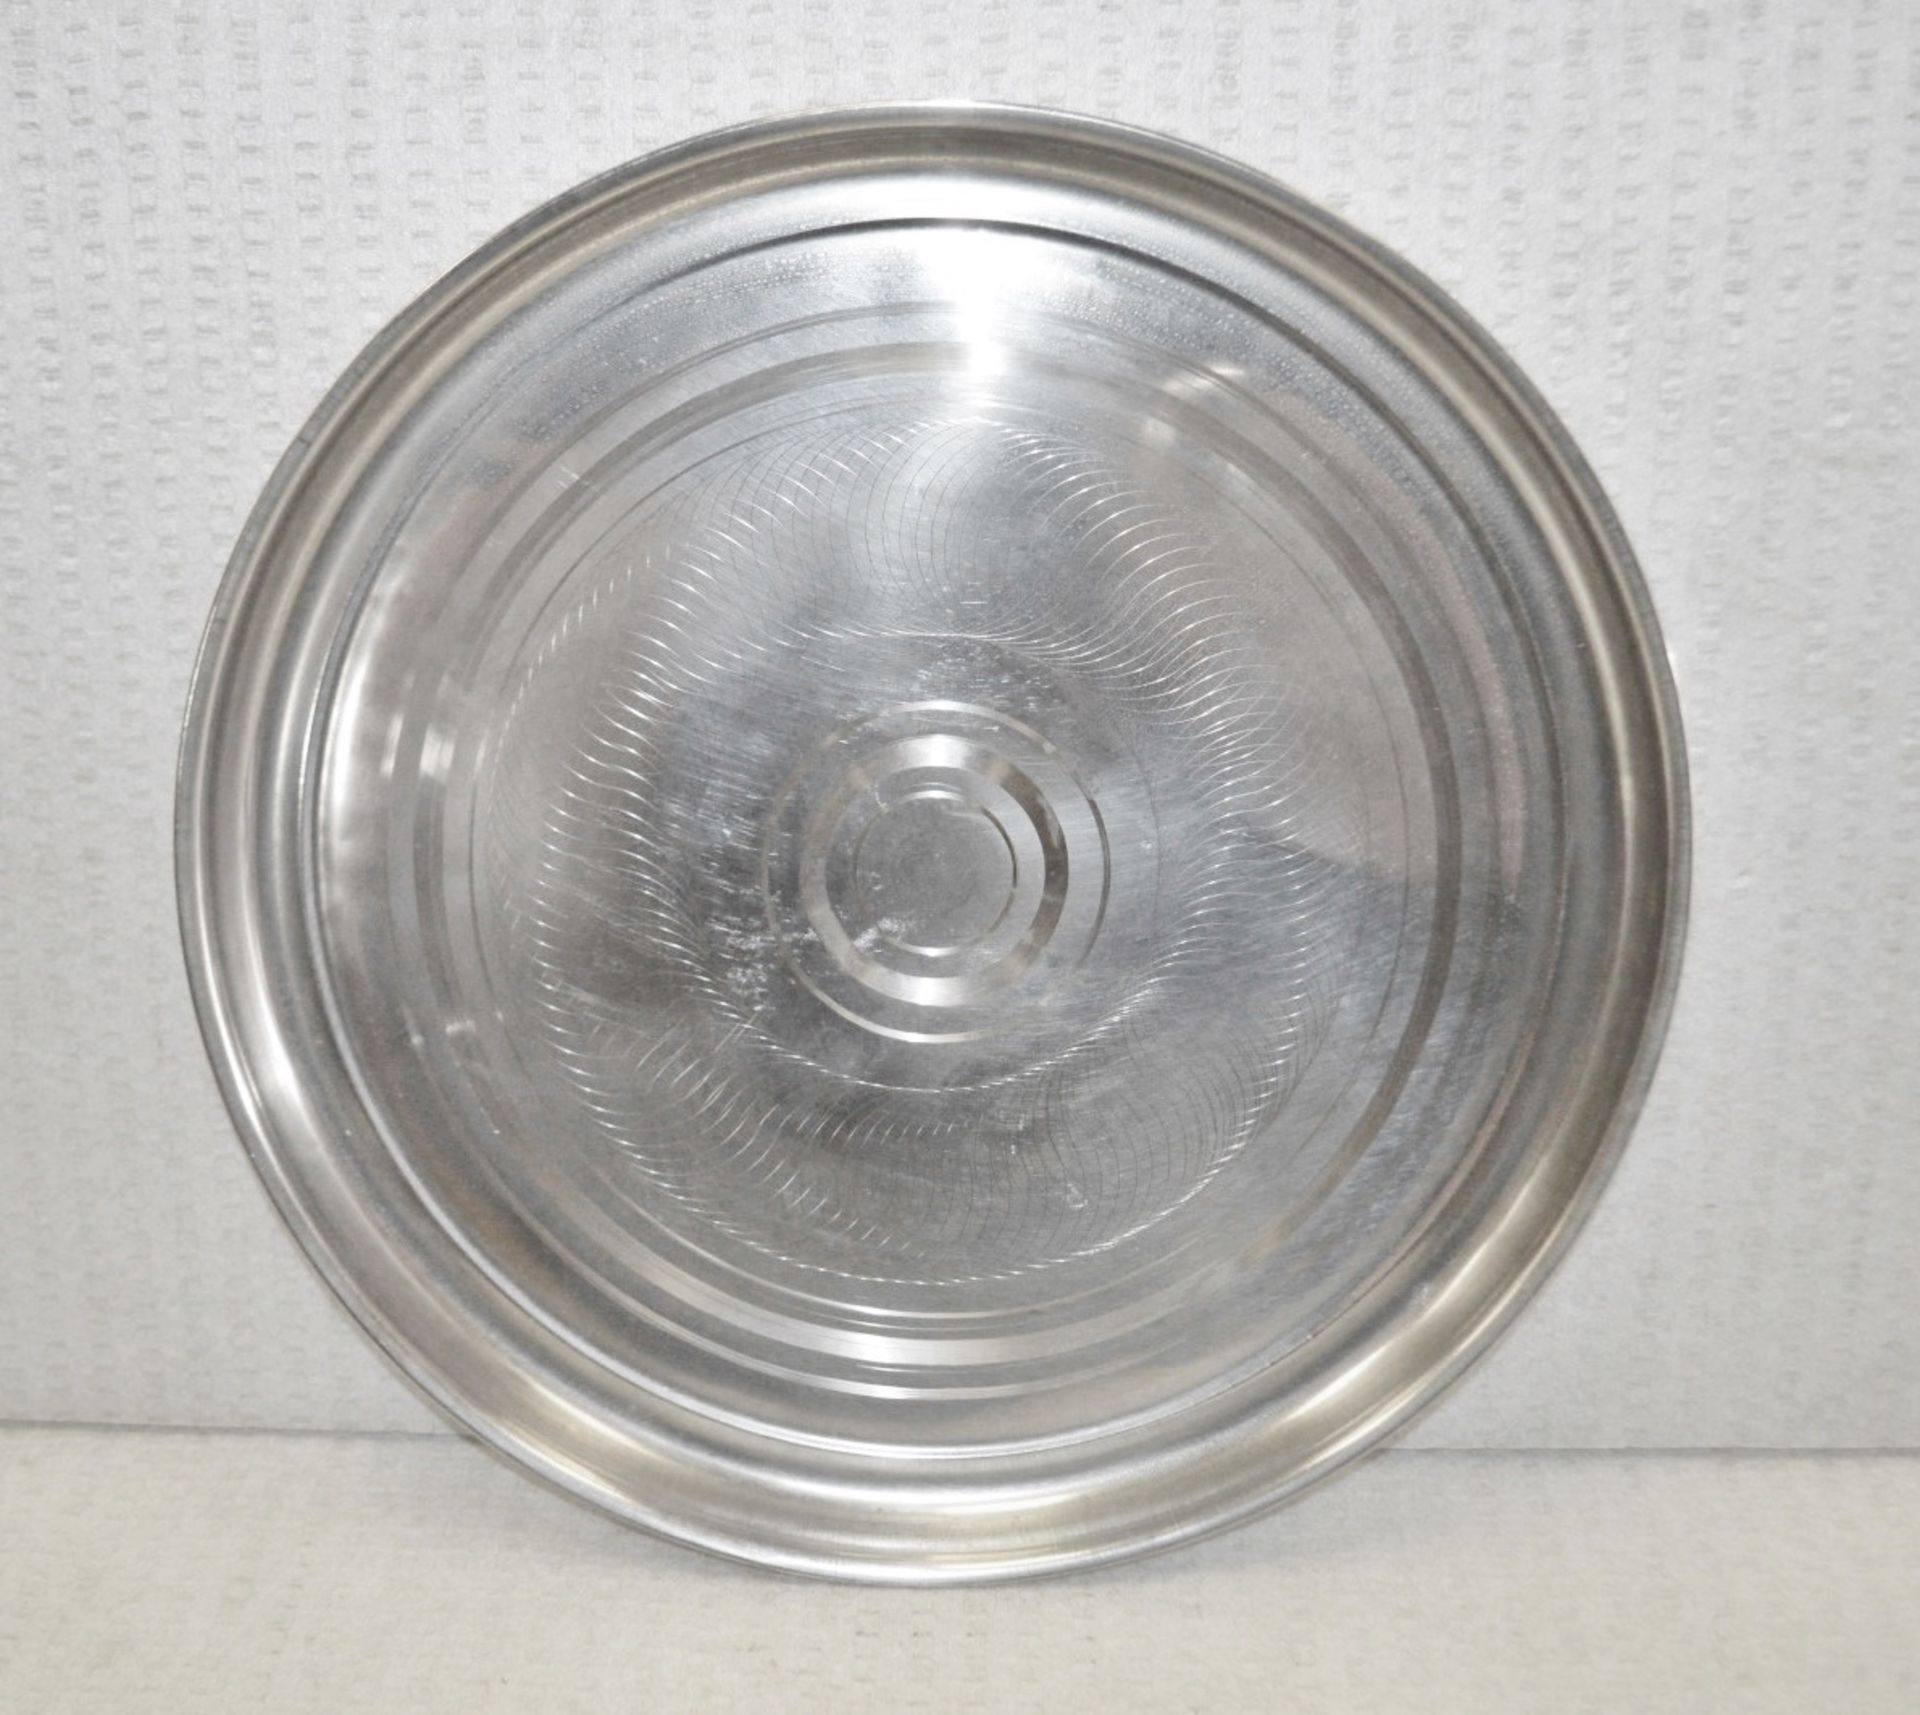 3 x Large Silver Stainless Steel Silver Serving Trays - Dimensions: L45 x W45 cm - Recently - Image 2 of 3